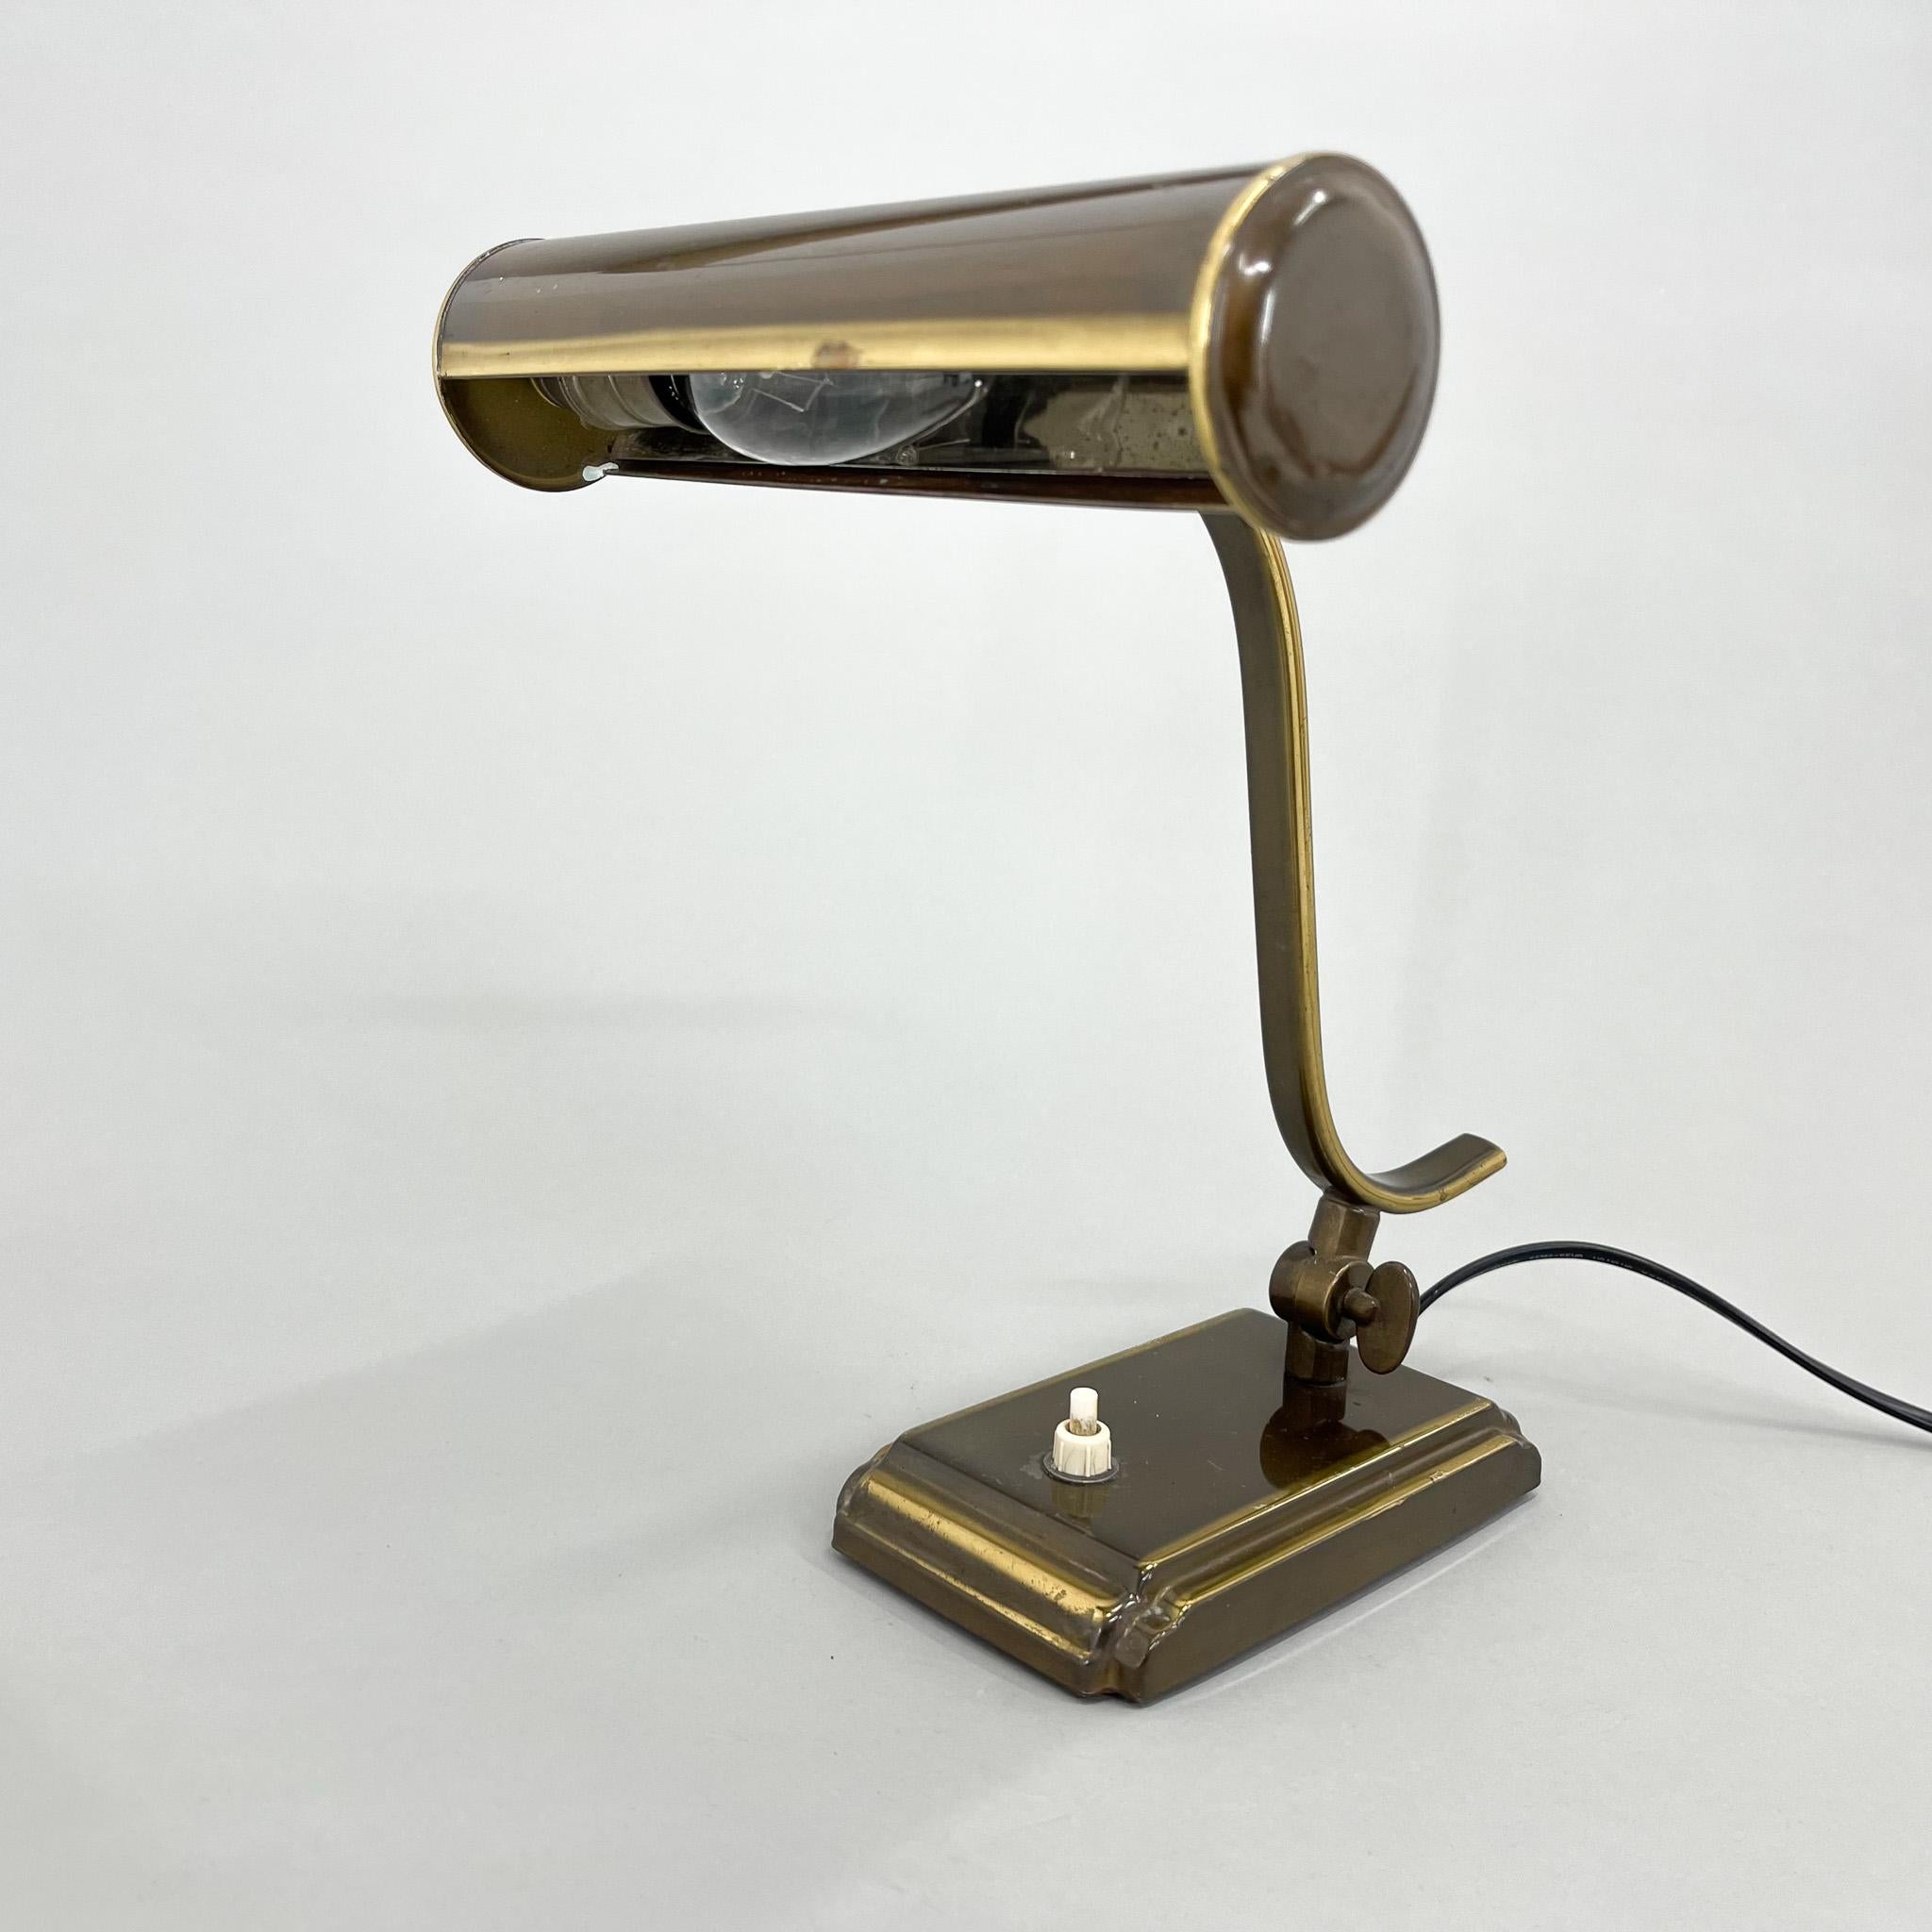 Adjustable table or desk lamp with a brass look patina. Made in Poland in the 1940's. Bulbs: 1x E14.